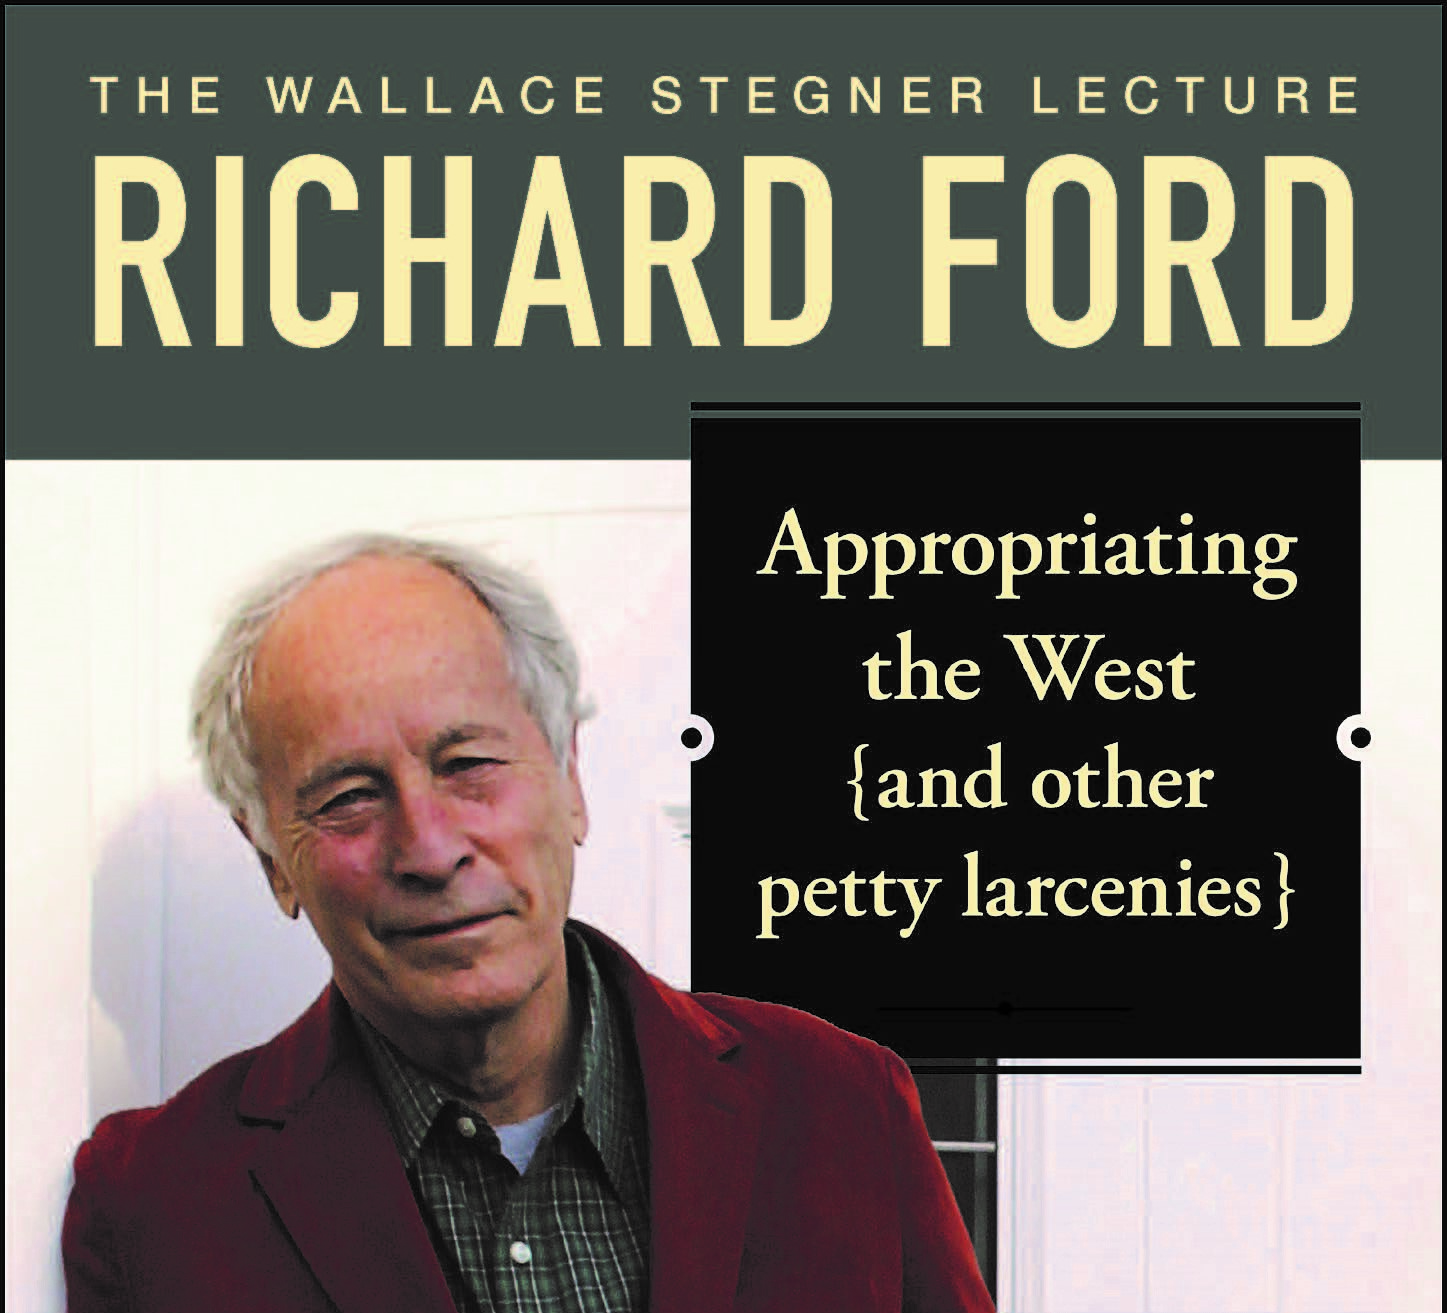 Richard Ford Event Poster